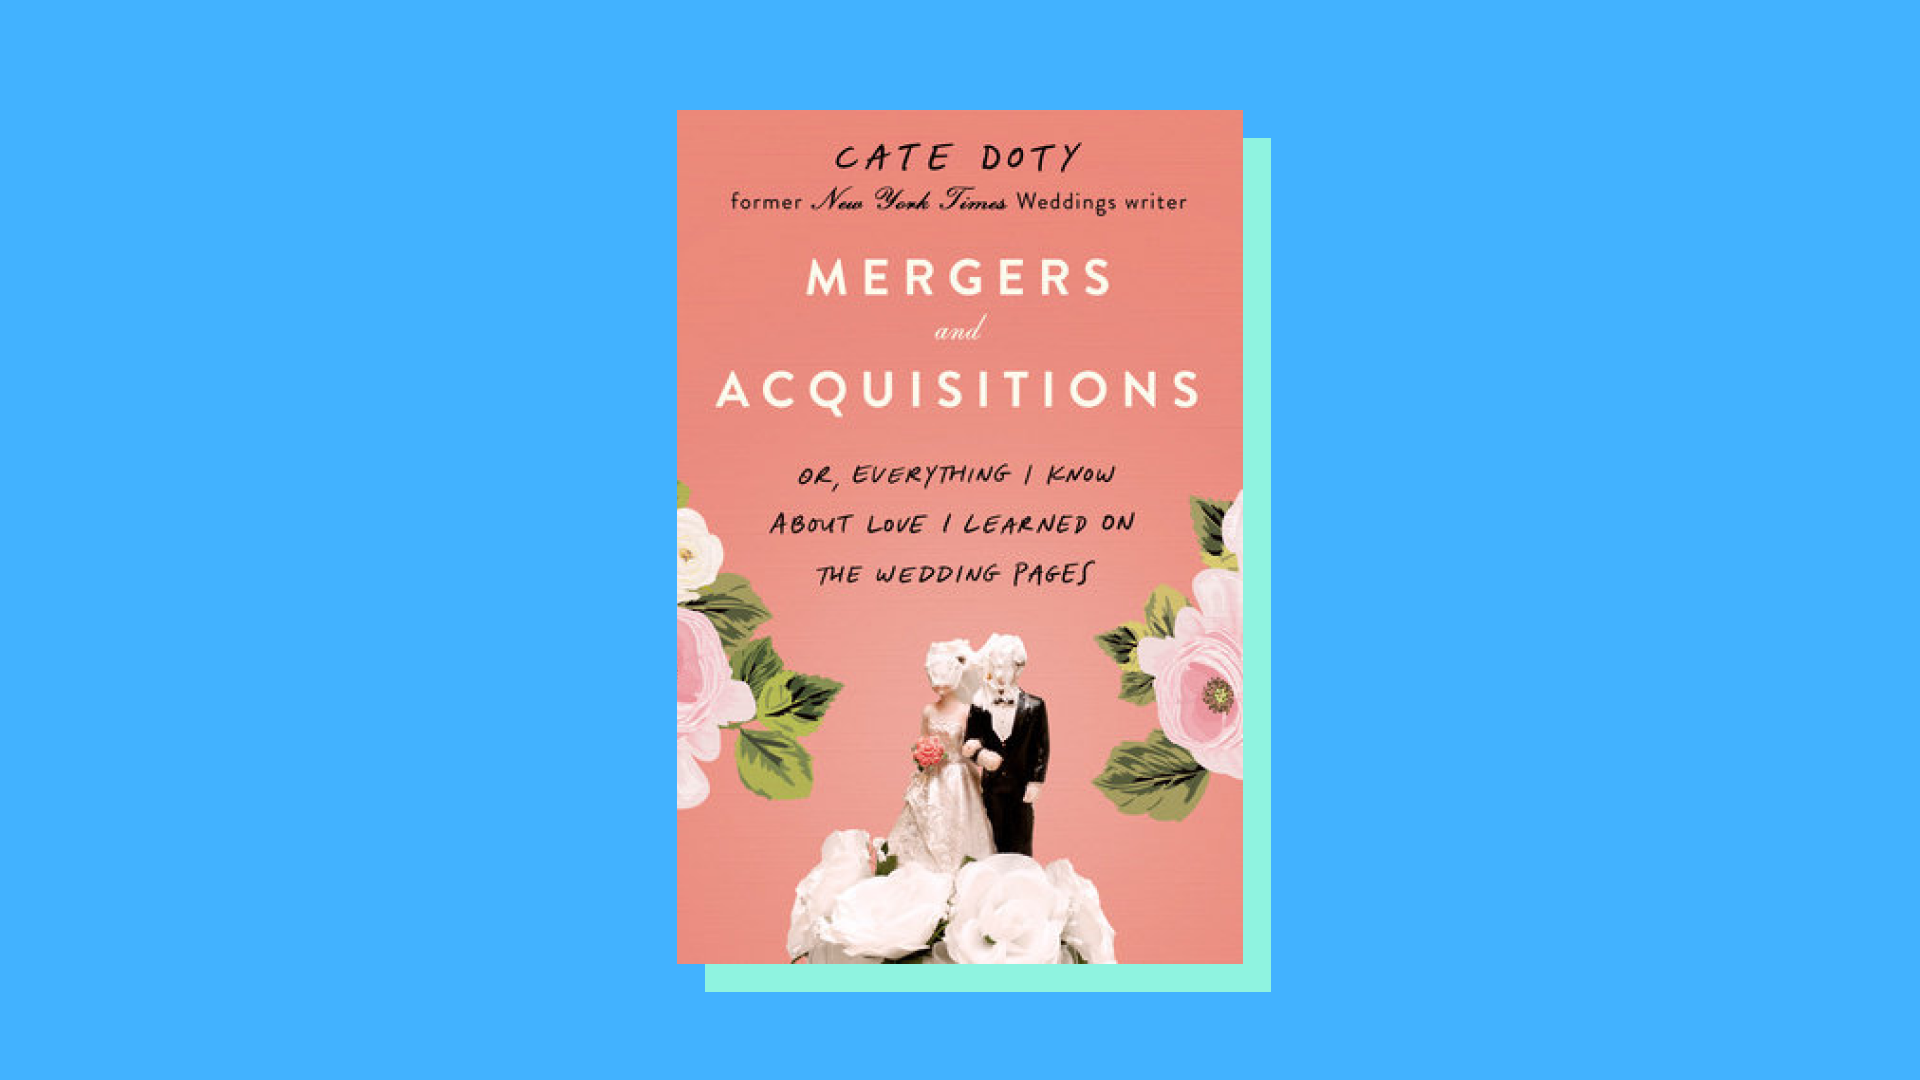 “Mergers and Acquisitions” by Cate Doty